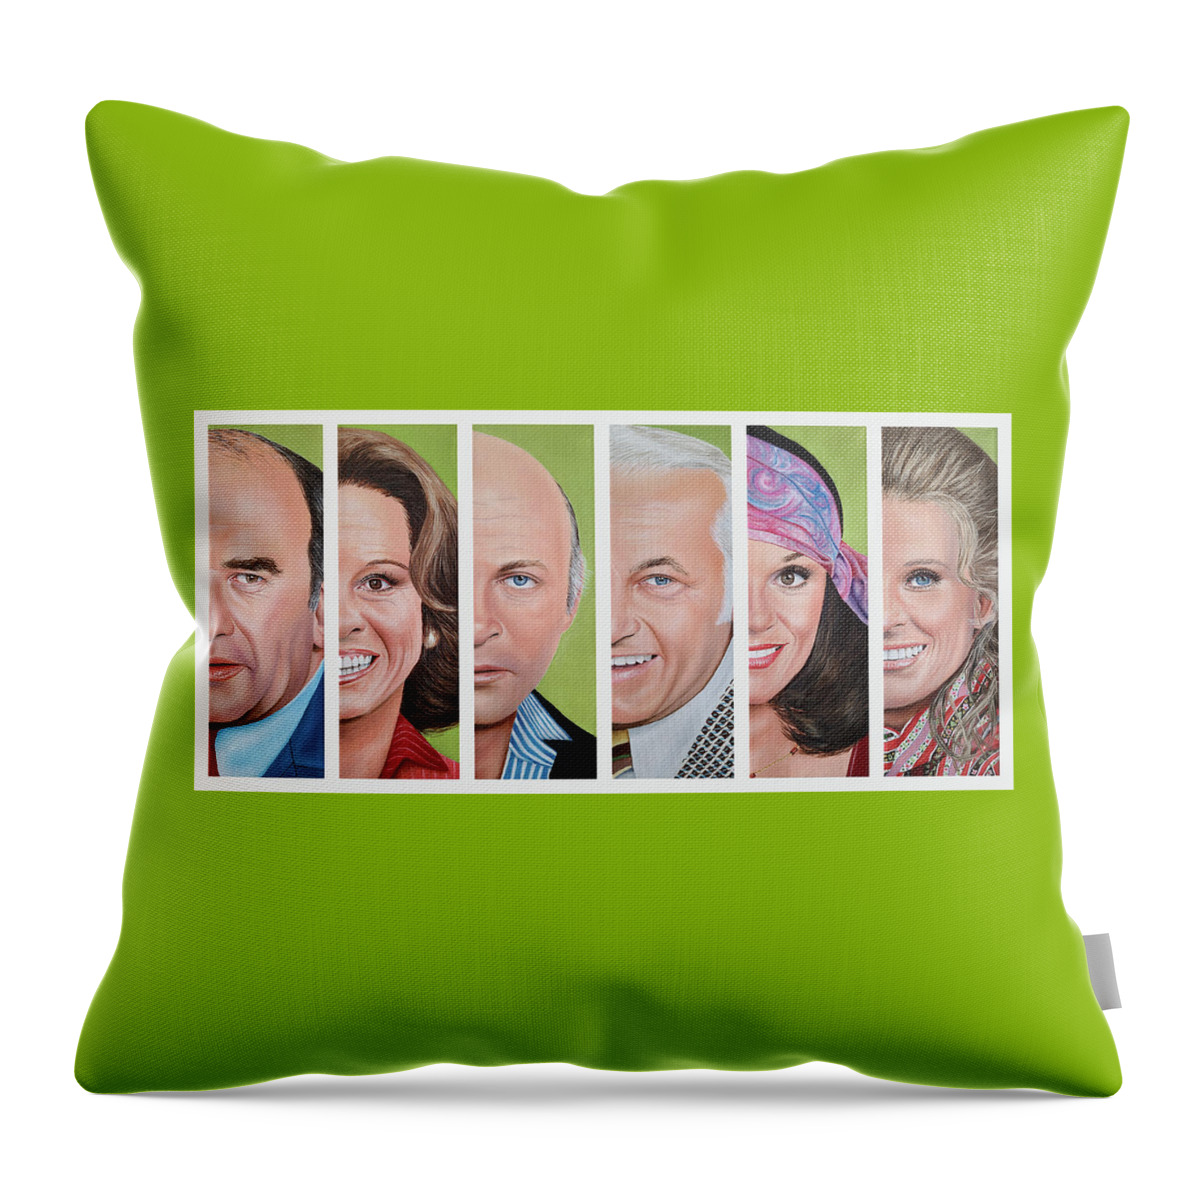 Mary Tyler Moore Show Throw Pillow featuring the painting Mary Tyler Moore Show - Set One by Vic Ritchey